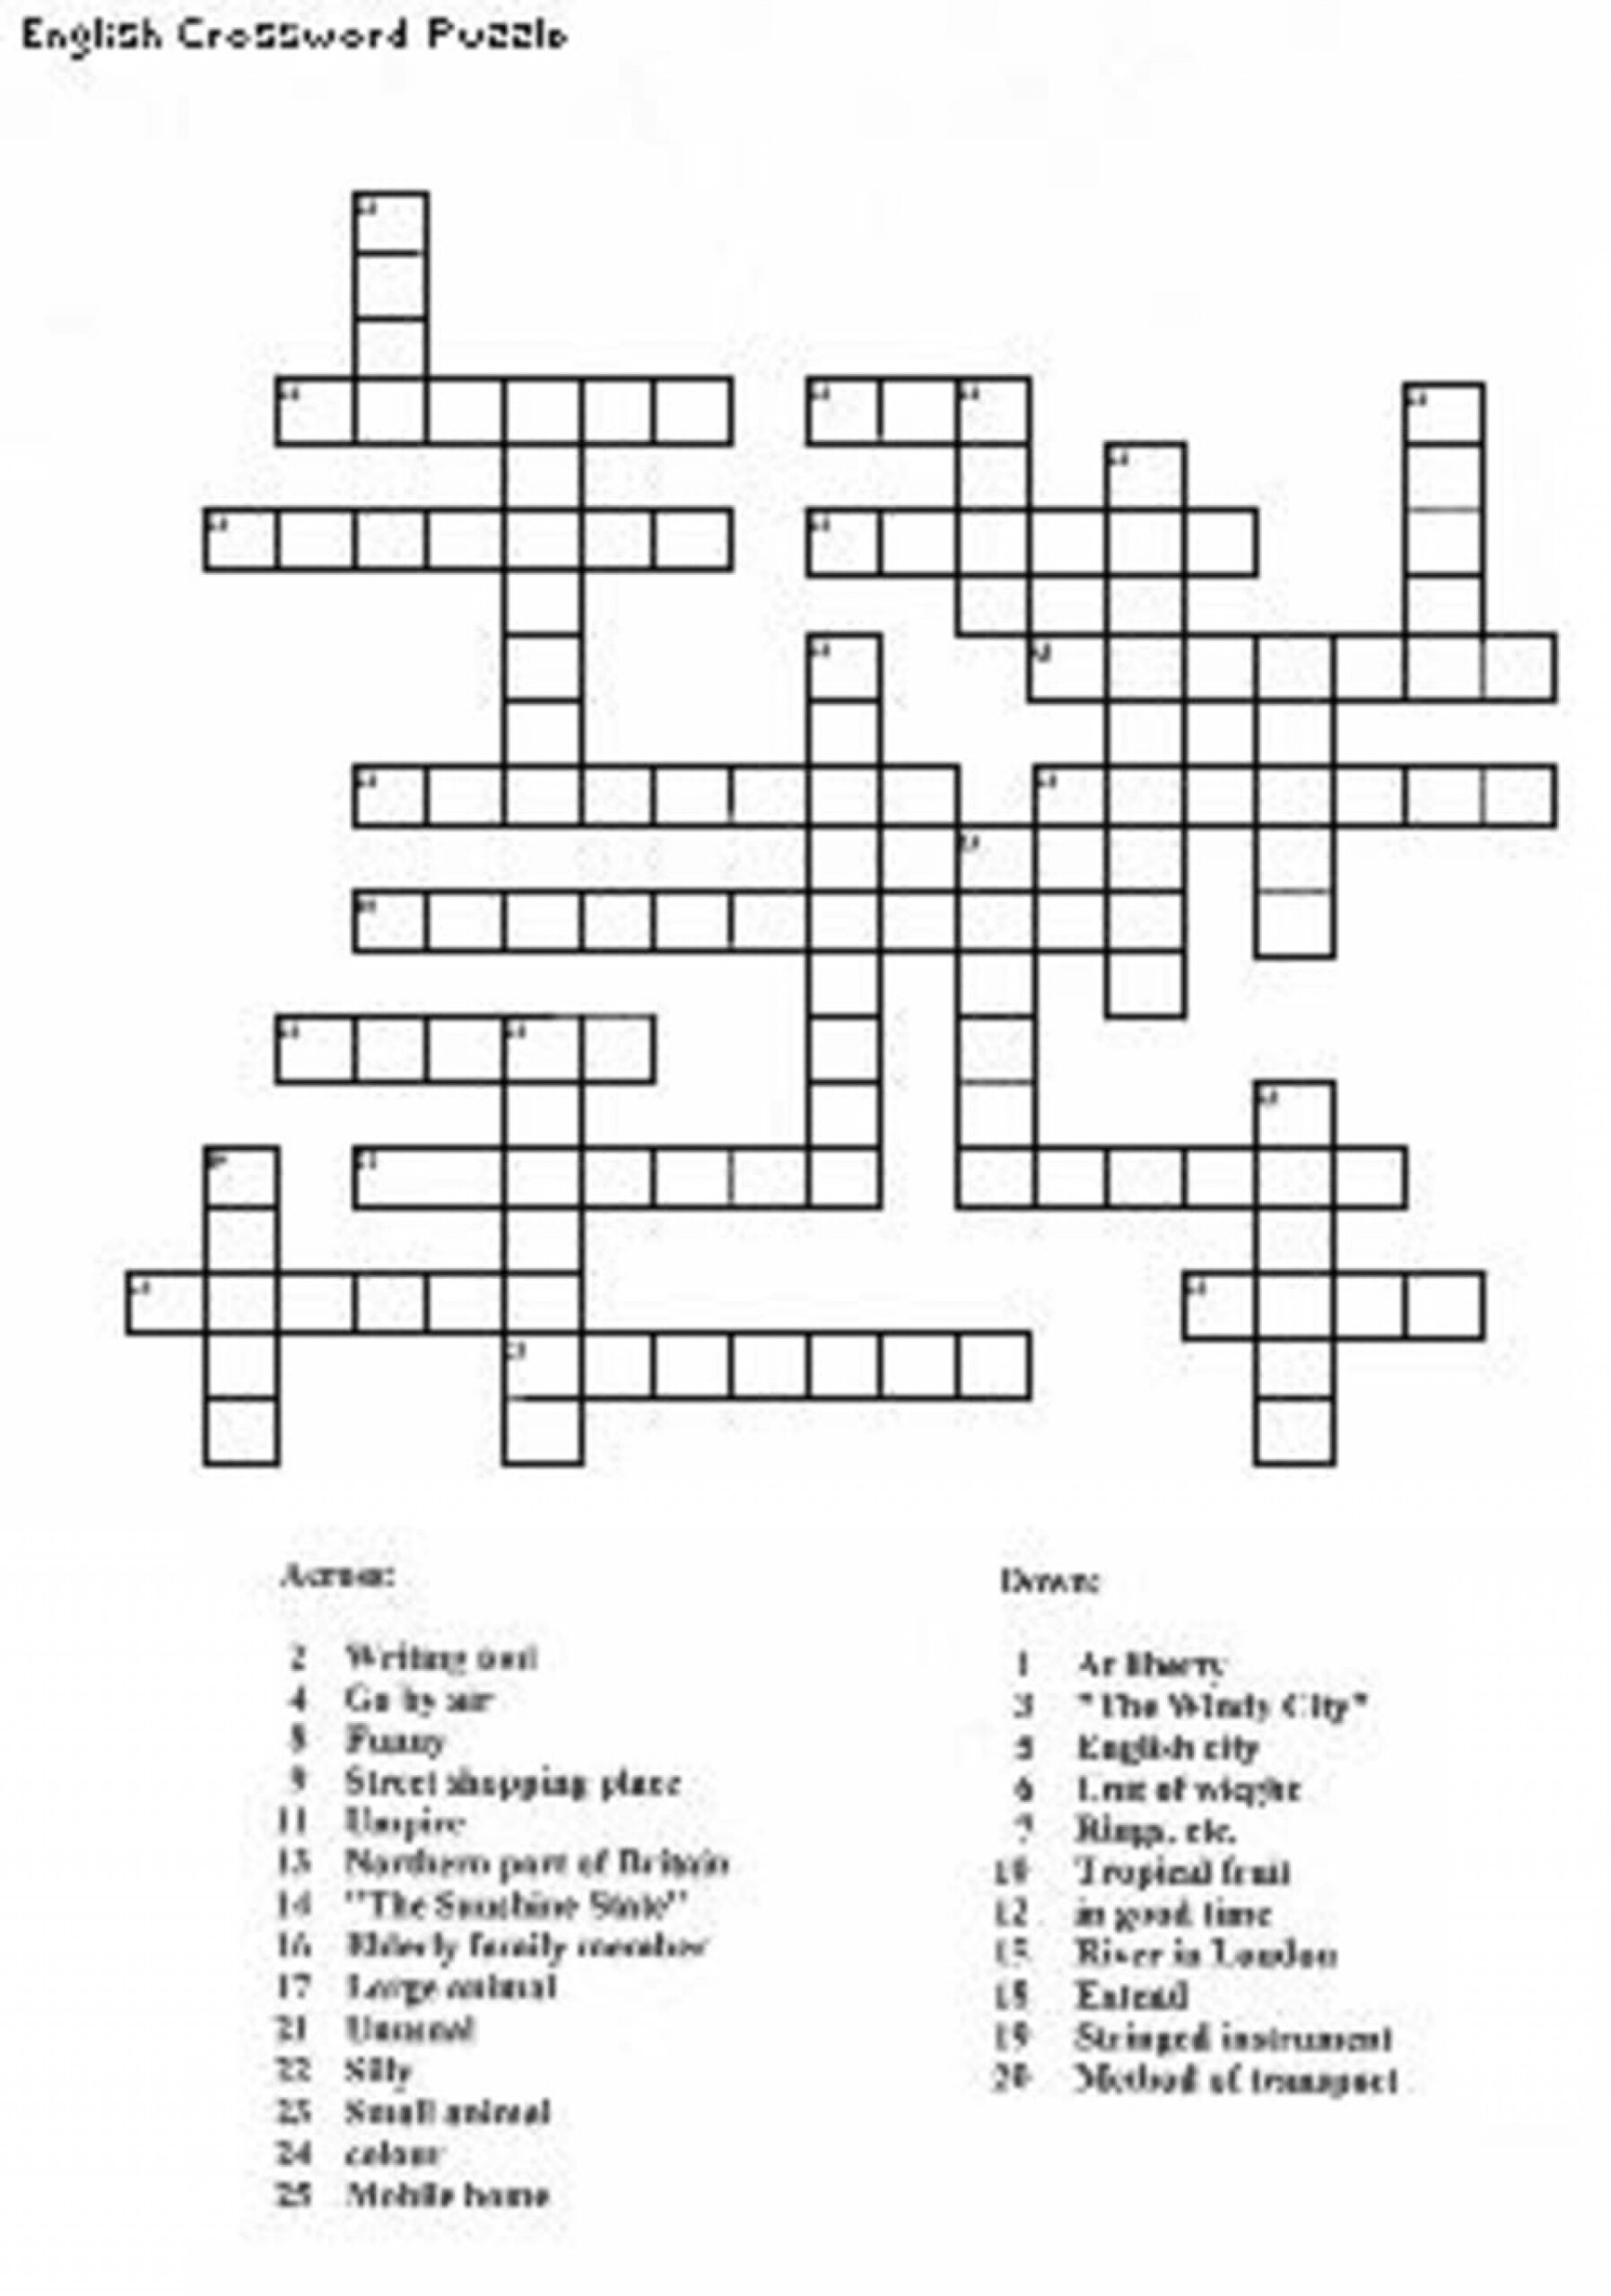 Make Your Own Crossword Puzzle Free Printable Printable Crossword Puzzles - Easy Printable Crossword Puzzle Maker